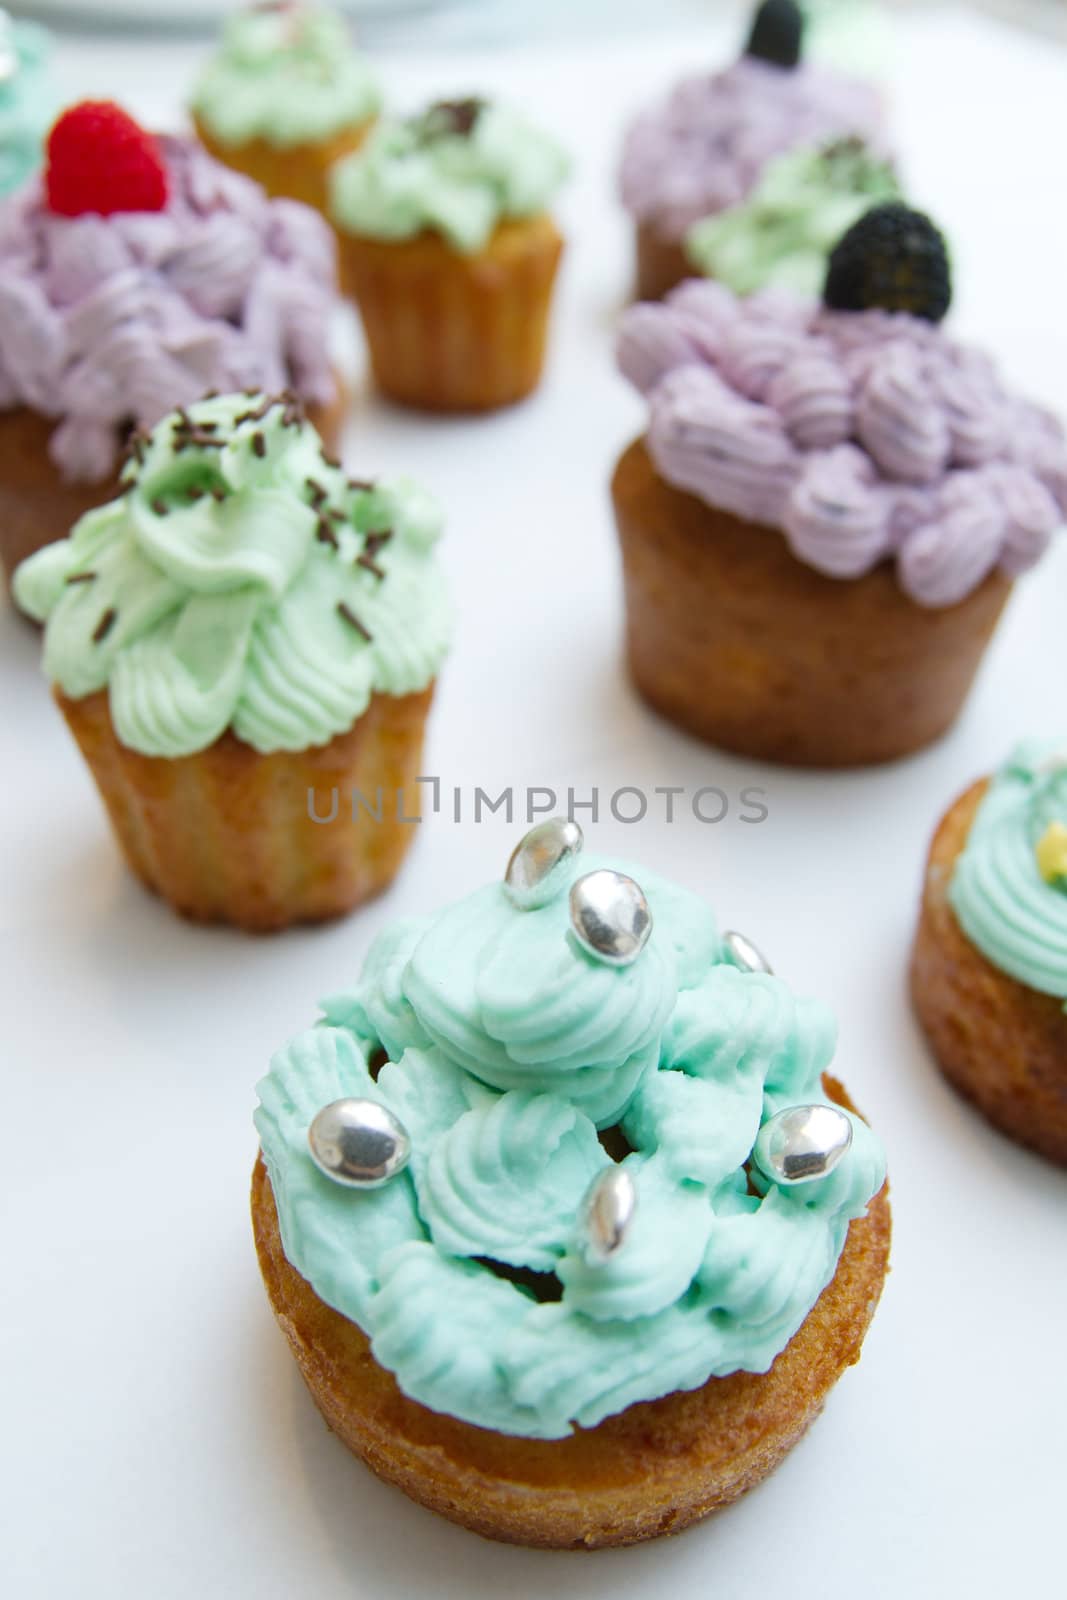 Cupcakes on white background by chrisroll